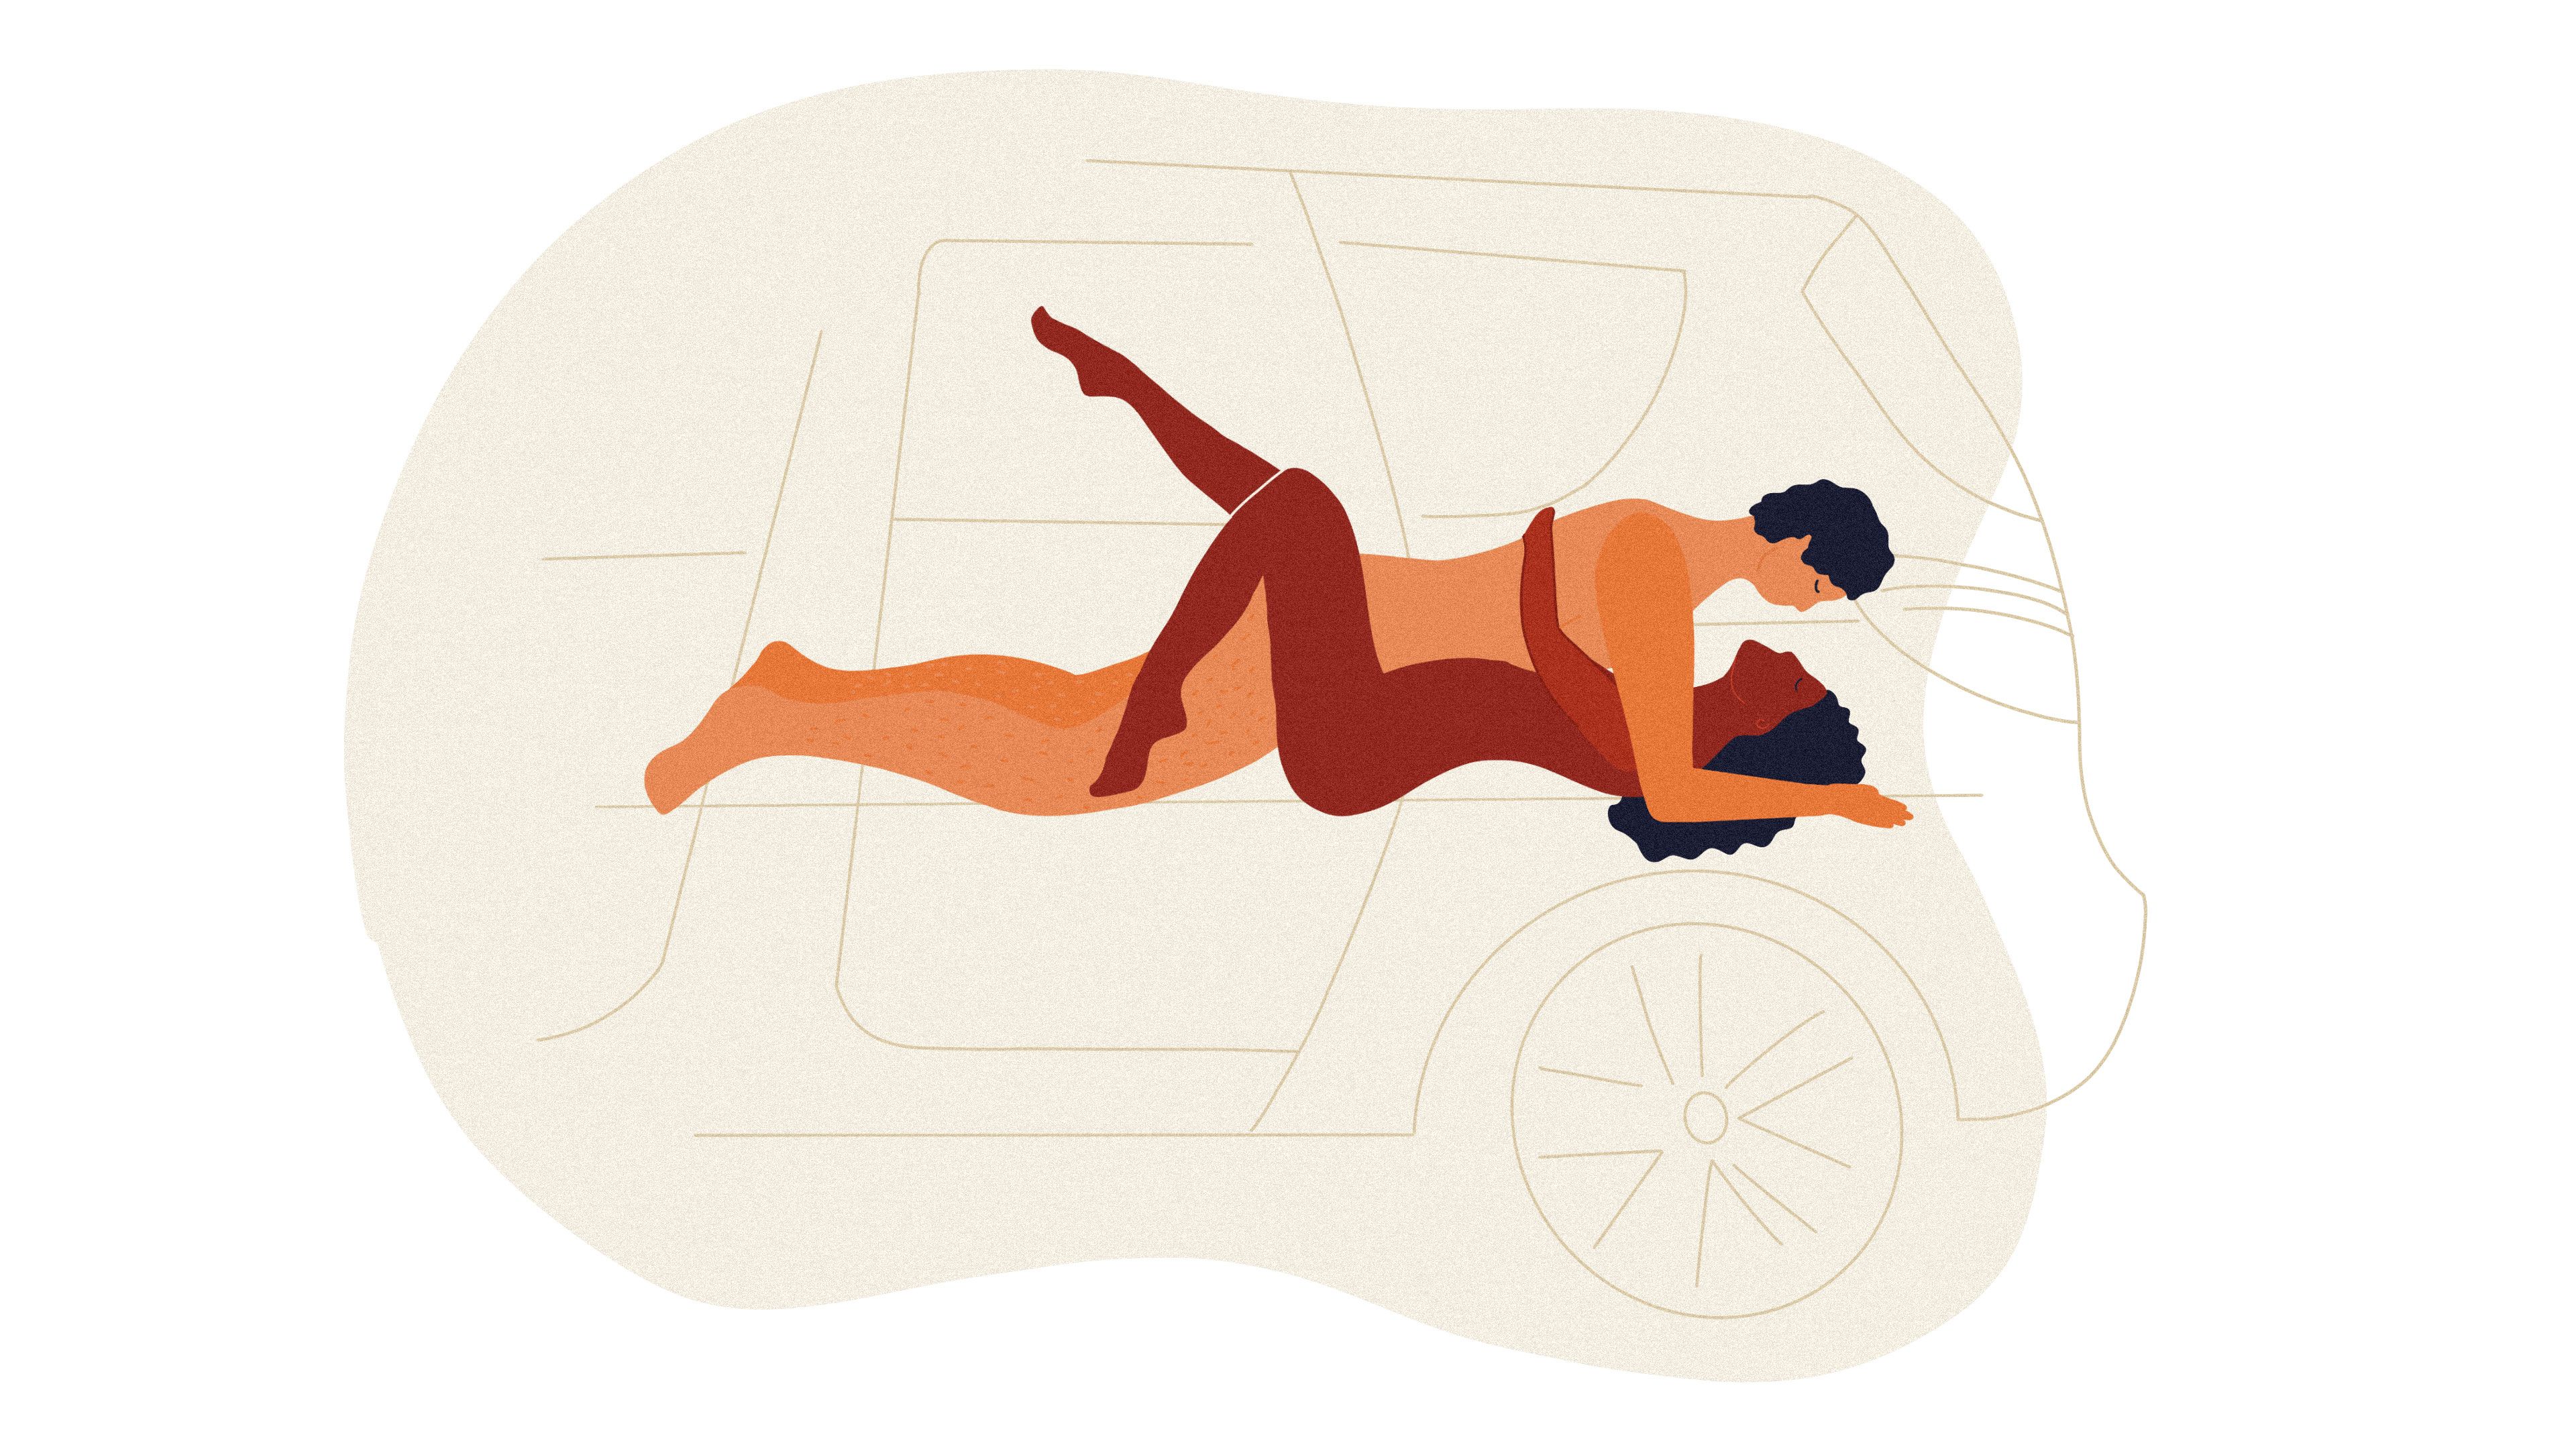 Best Sex Positions Missionary - The 10 Best Car Sex Positions - How to Have Sex in a Car